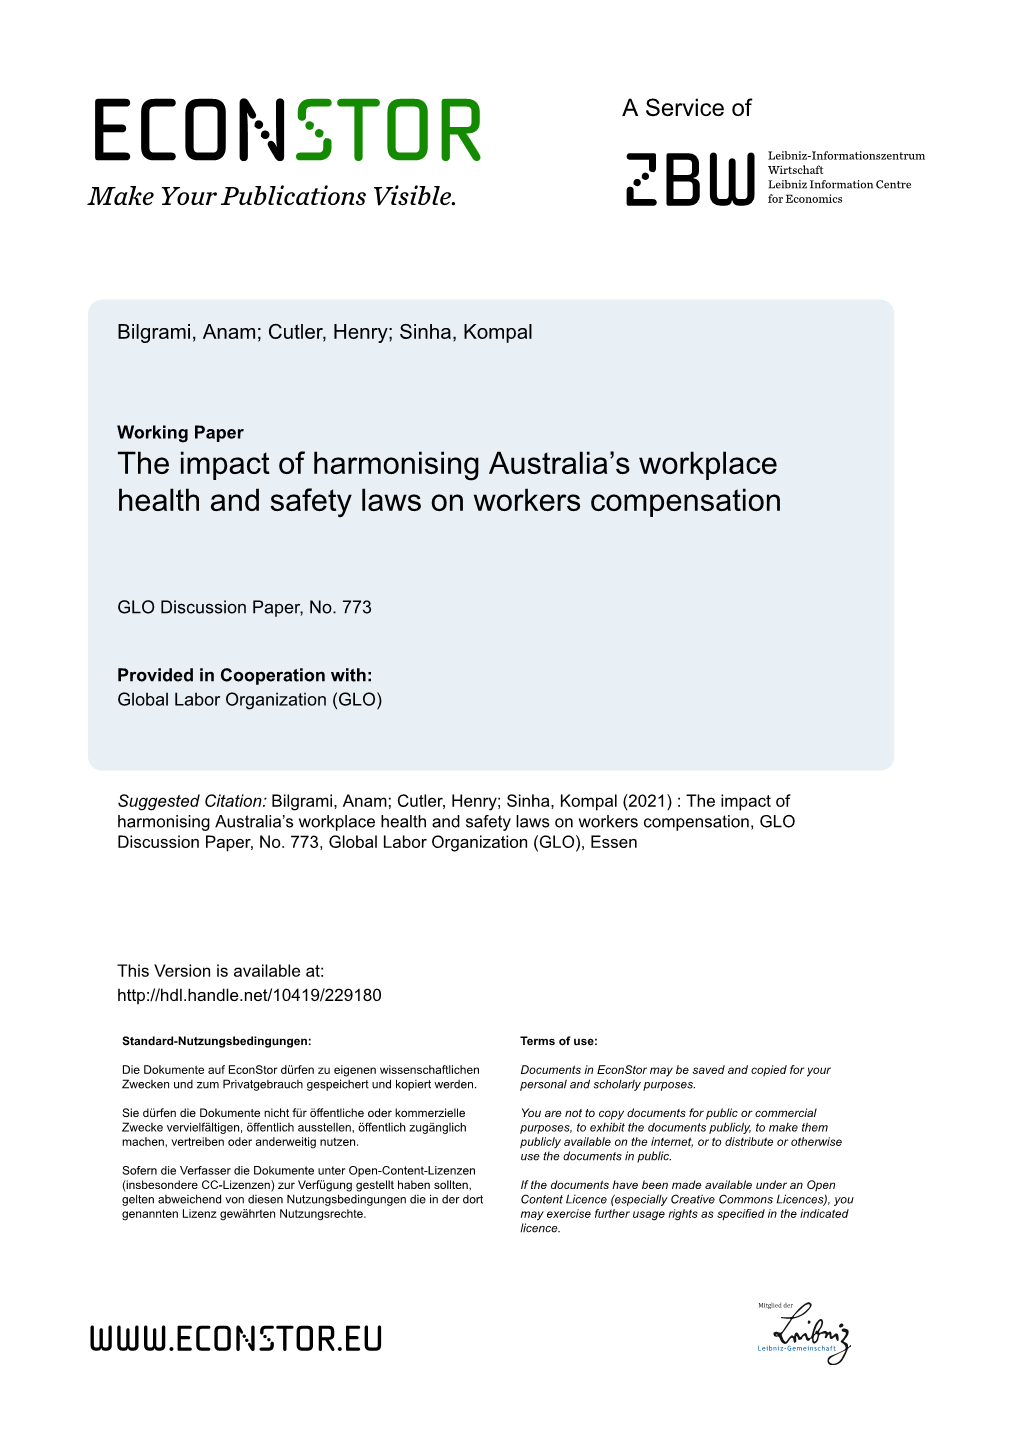 The Impact of Harmonising Australia's Workplace Health and Safety Laws